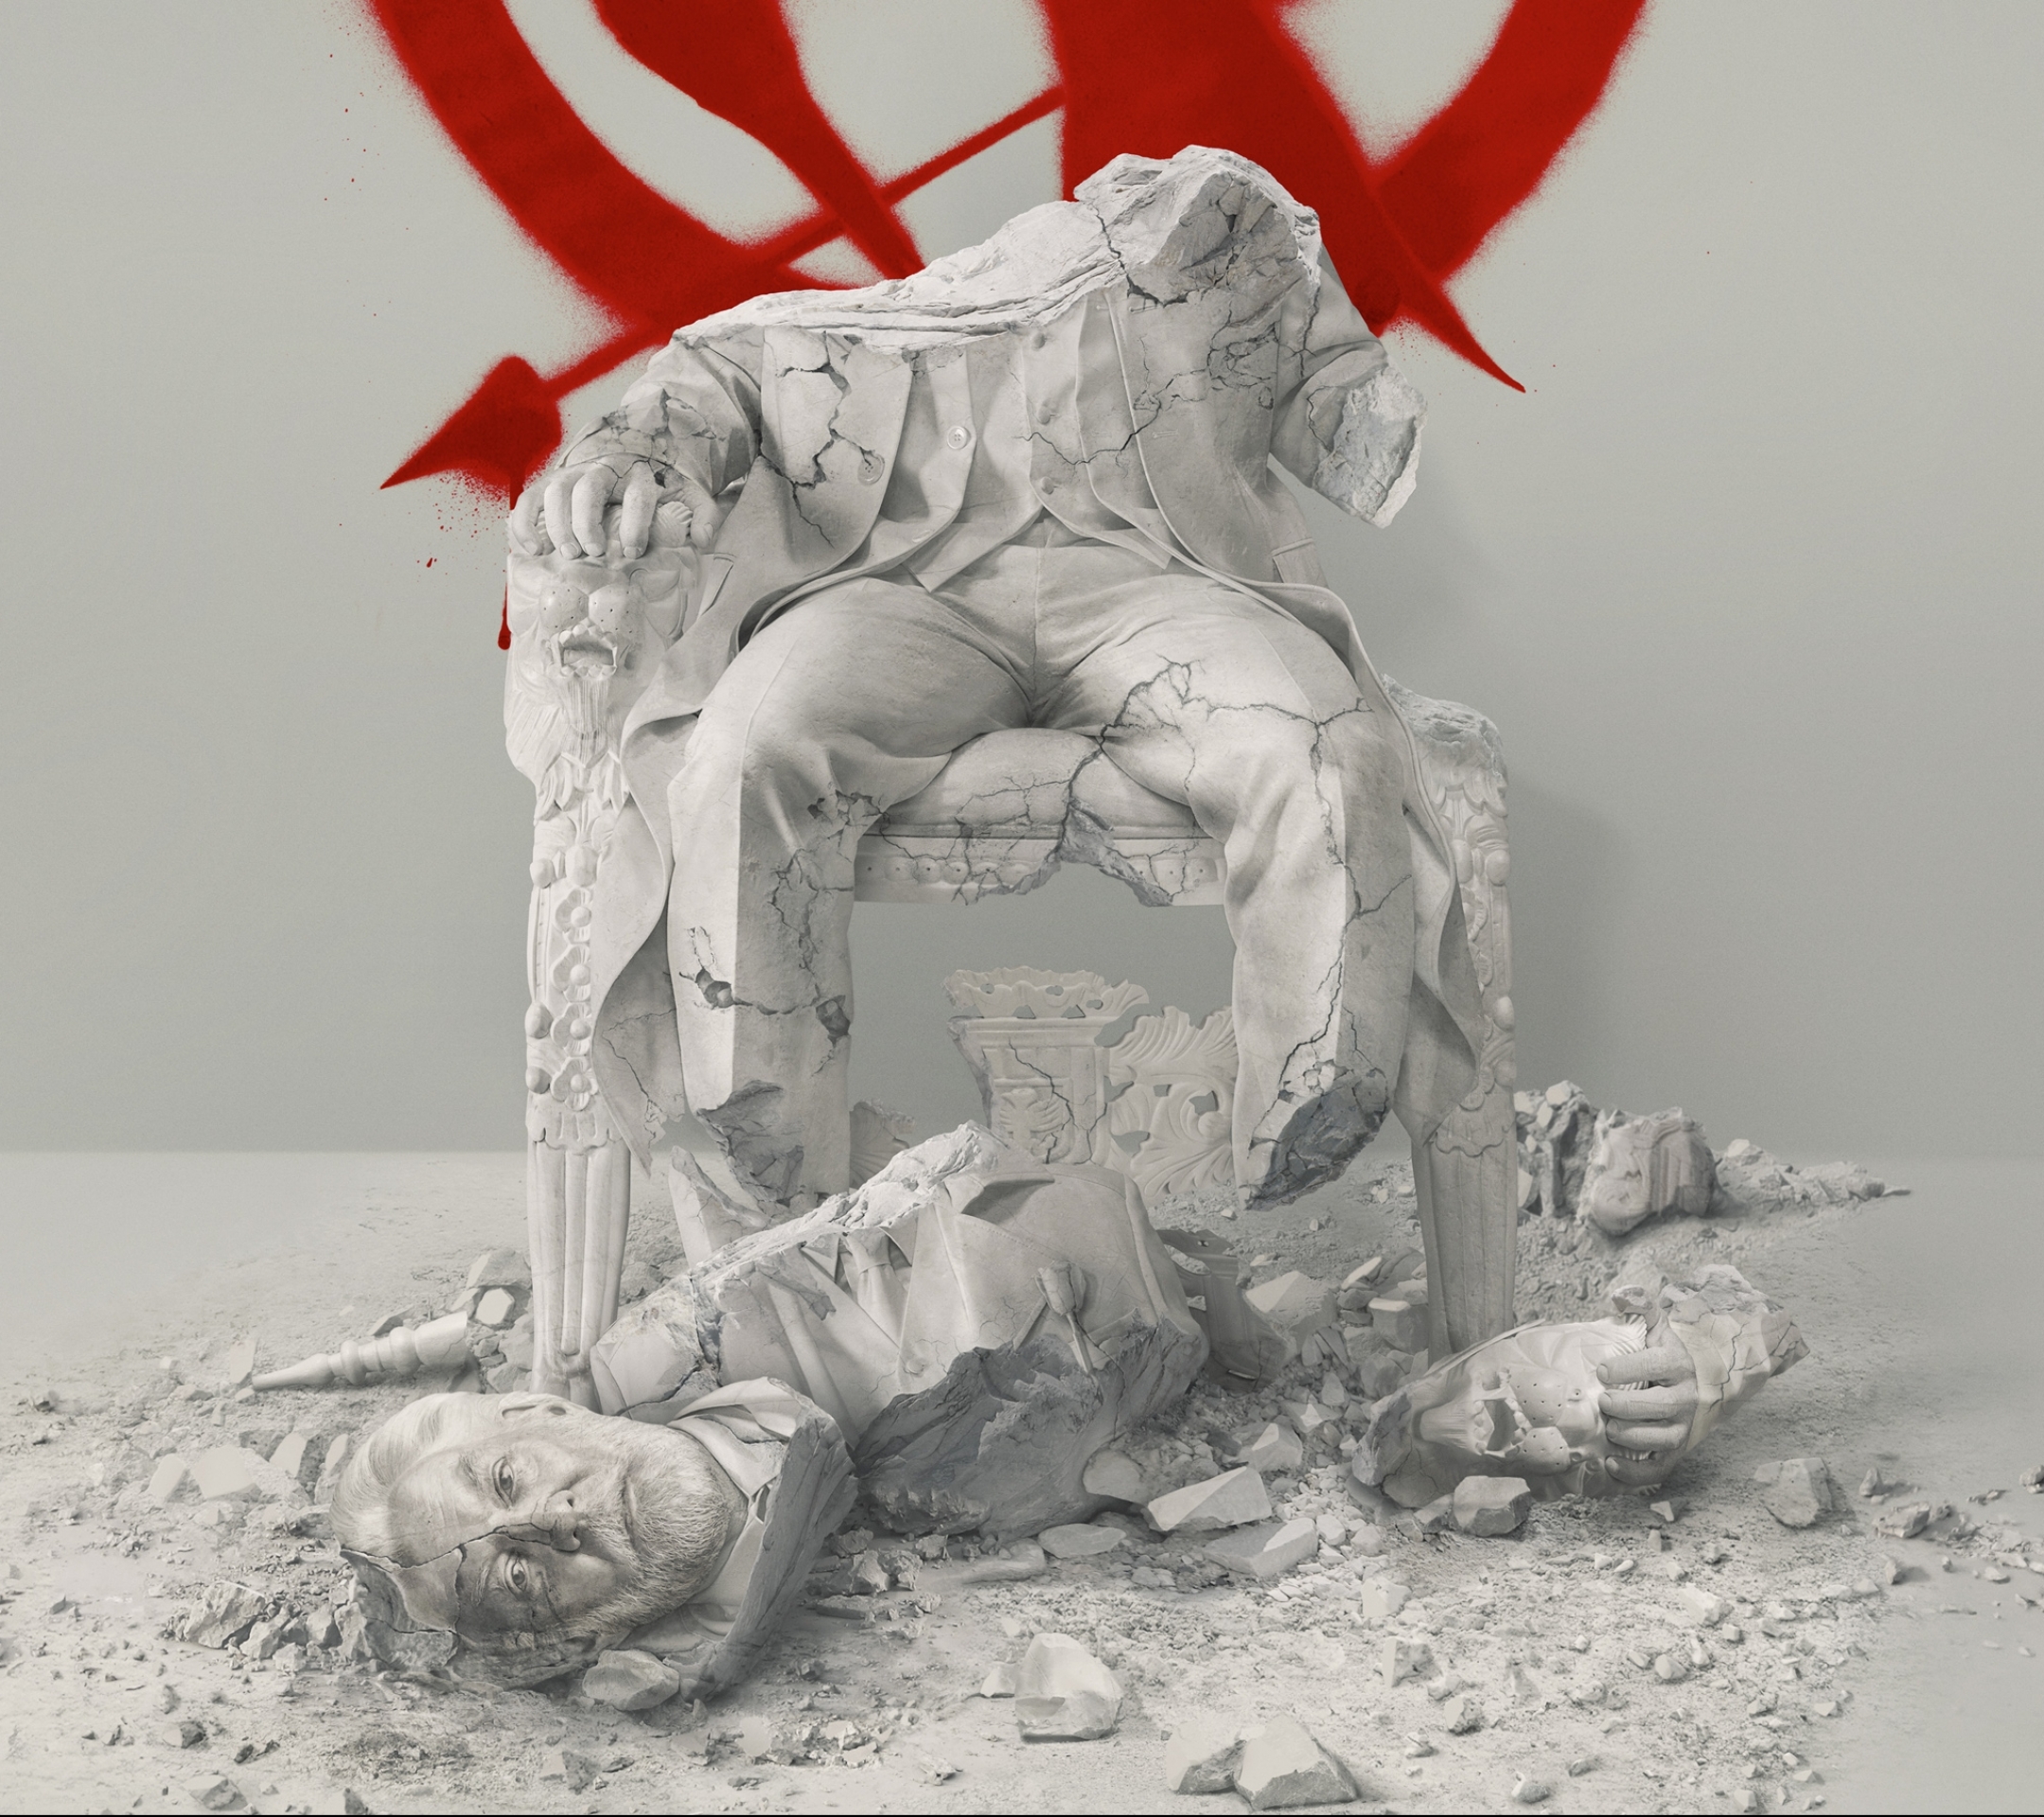 Free download wallpaper Movie, The Hunger Games, The Hunger Games: Mockingjay Part 2 on your PC desktop